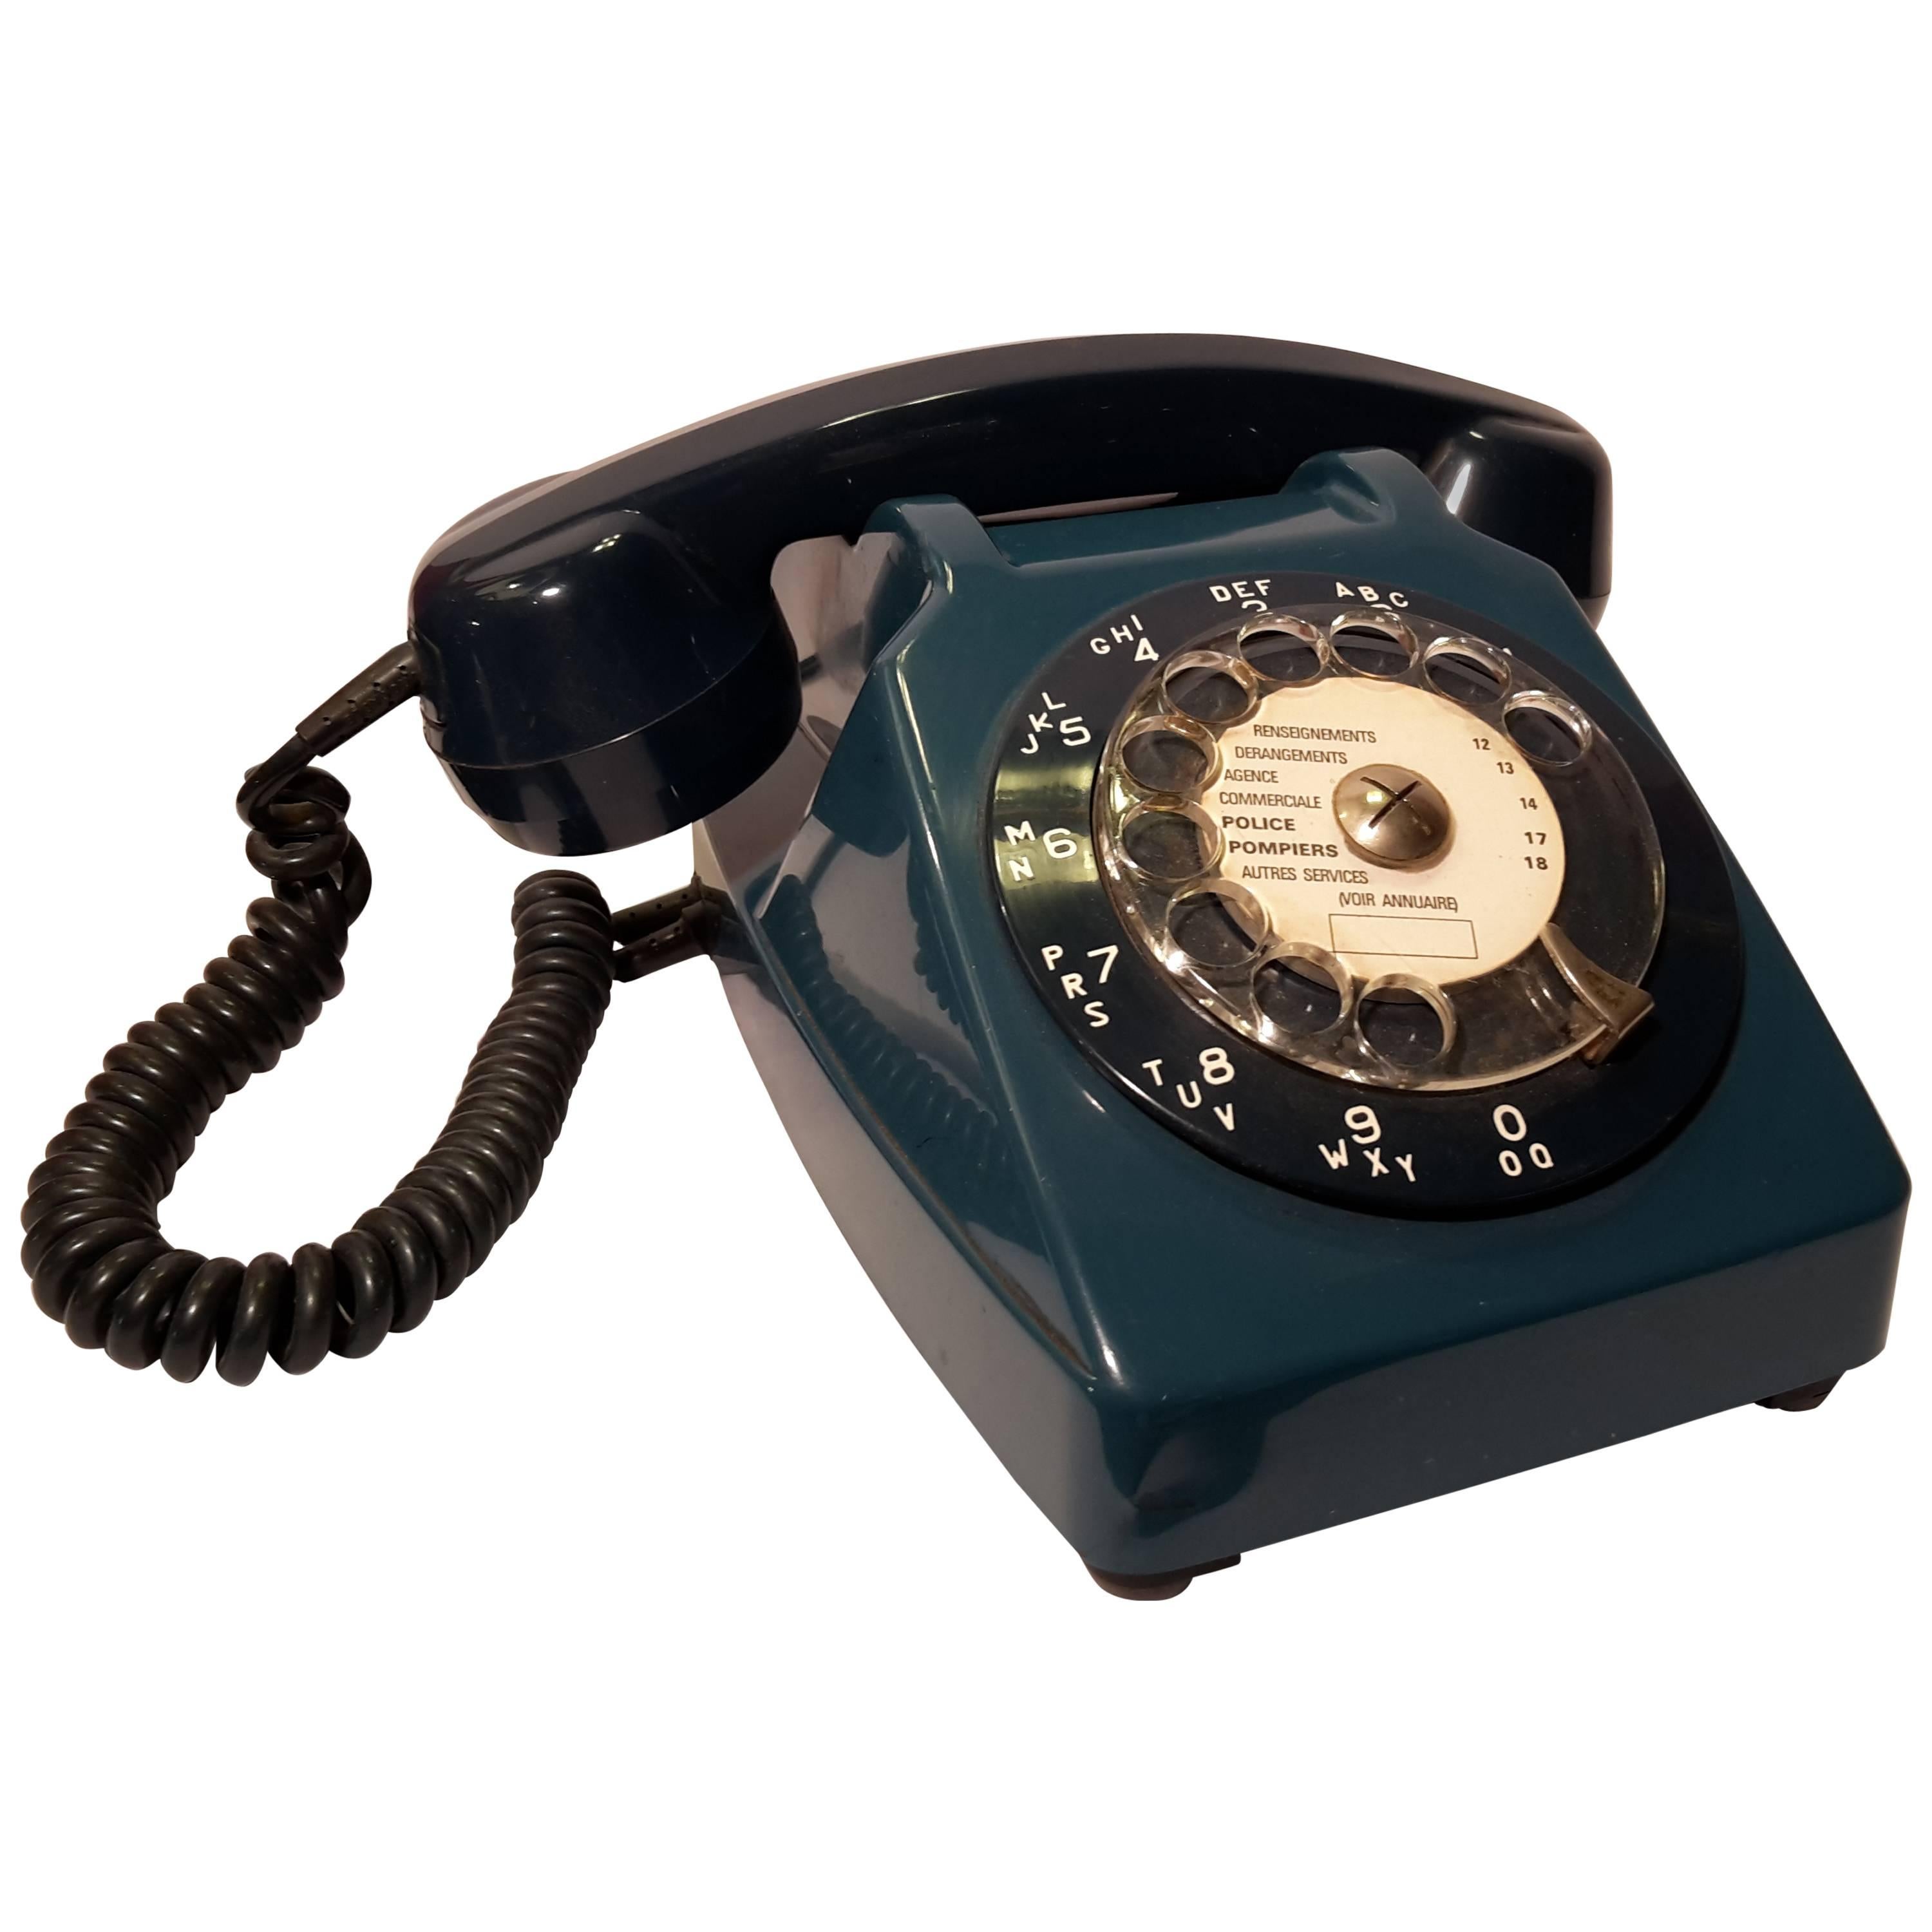 Telephone in Blue Bakelite from the 1970s